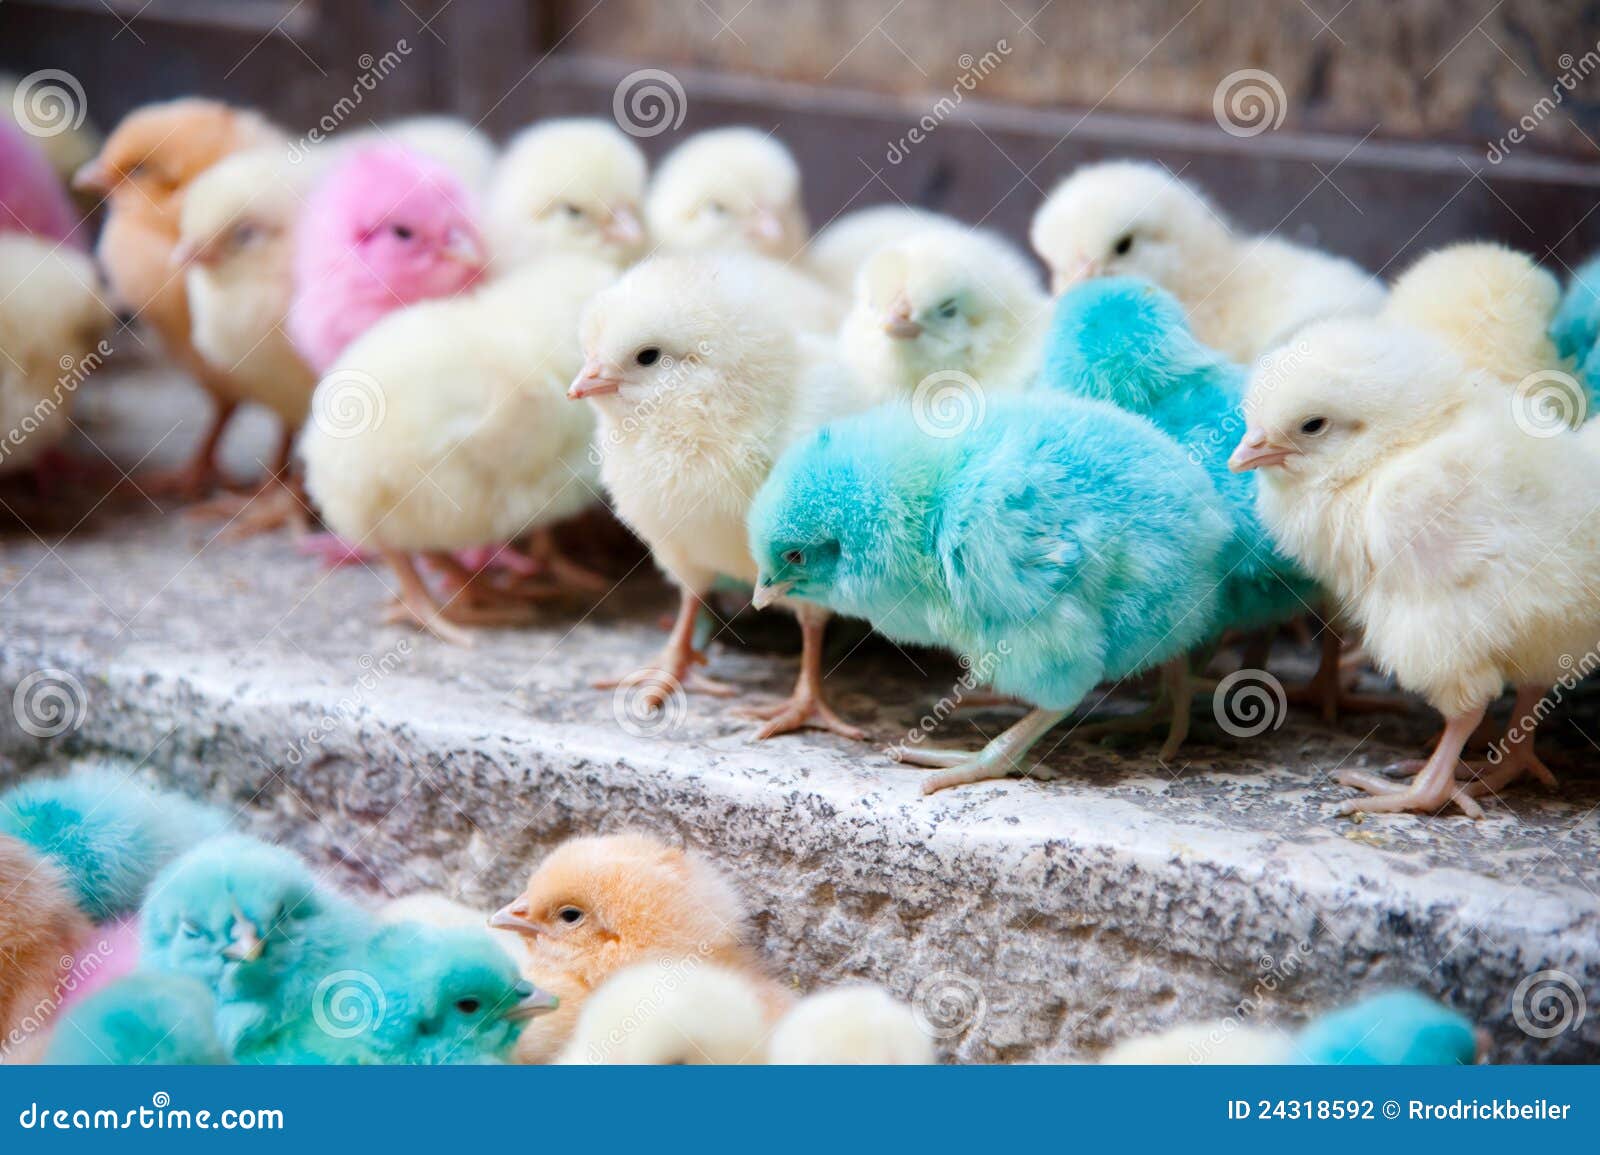 Pastel Colored Baby Chicks Stock Photo Image Of Chicken Effy Moom Free Coloring Picture wallpaper give a chance to color on the wall without getting in trouble! Fill the walls of your home or office with stress-relieving [effymoom.blogspot.com]